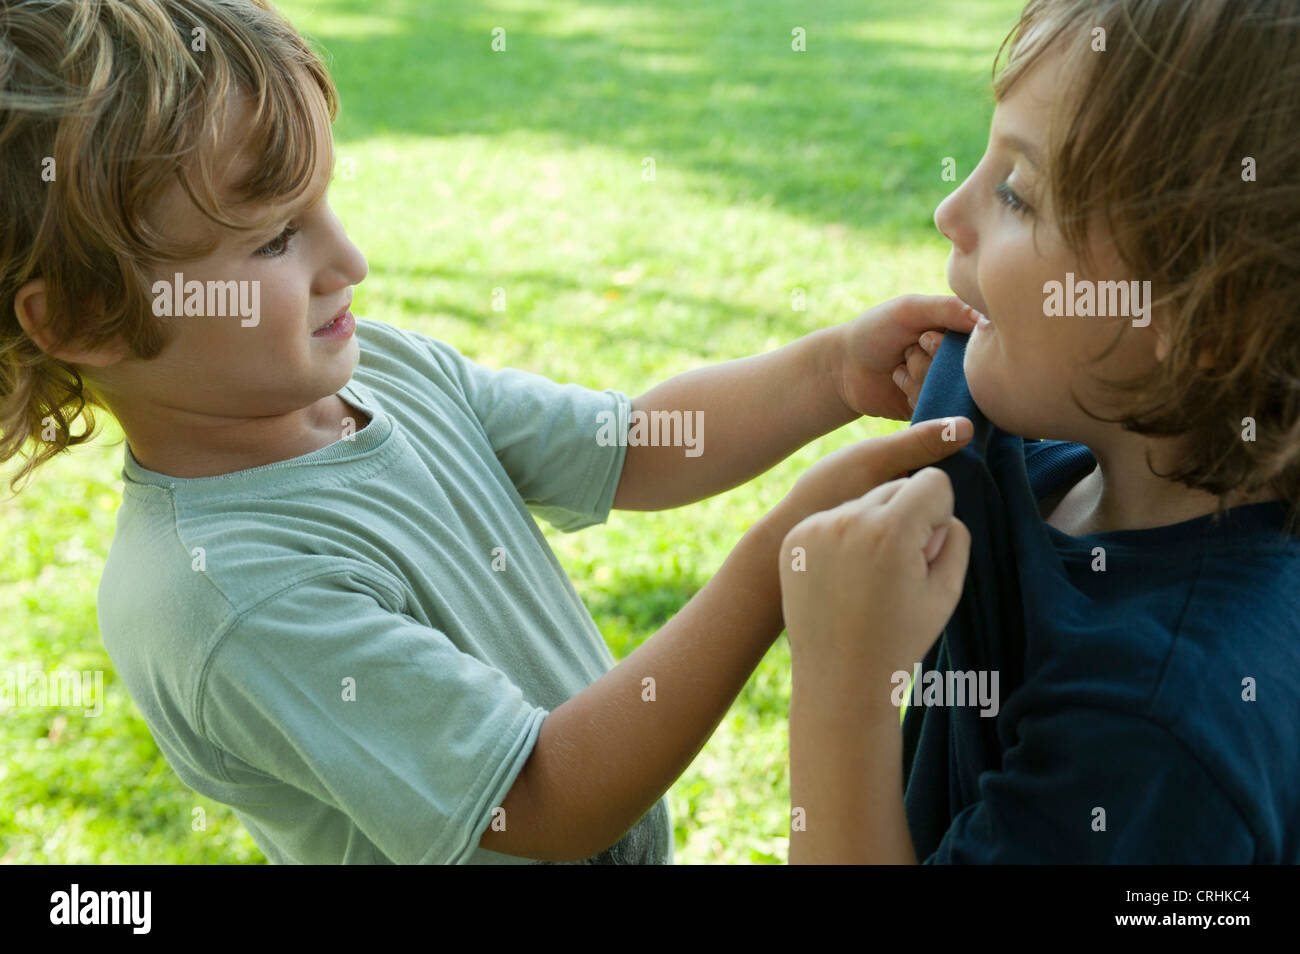 Boys fighting, one gripping the other's shirt Stock Photo